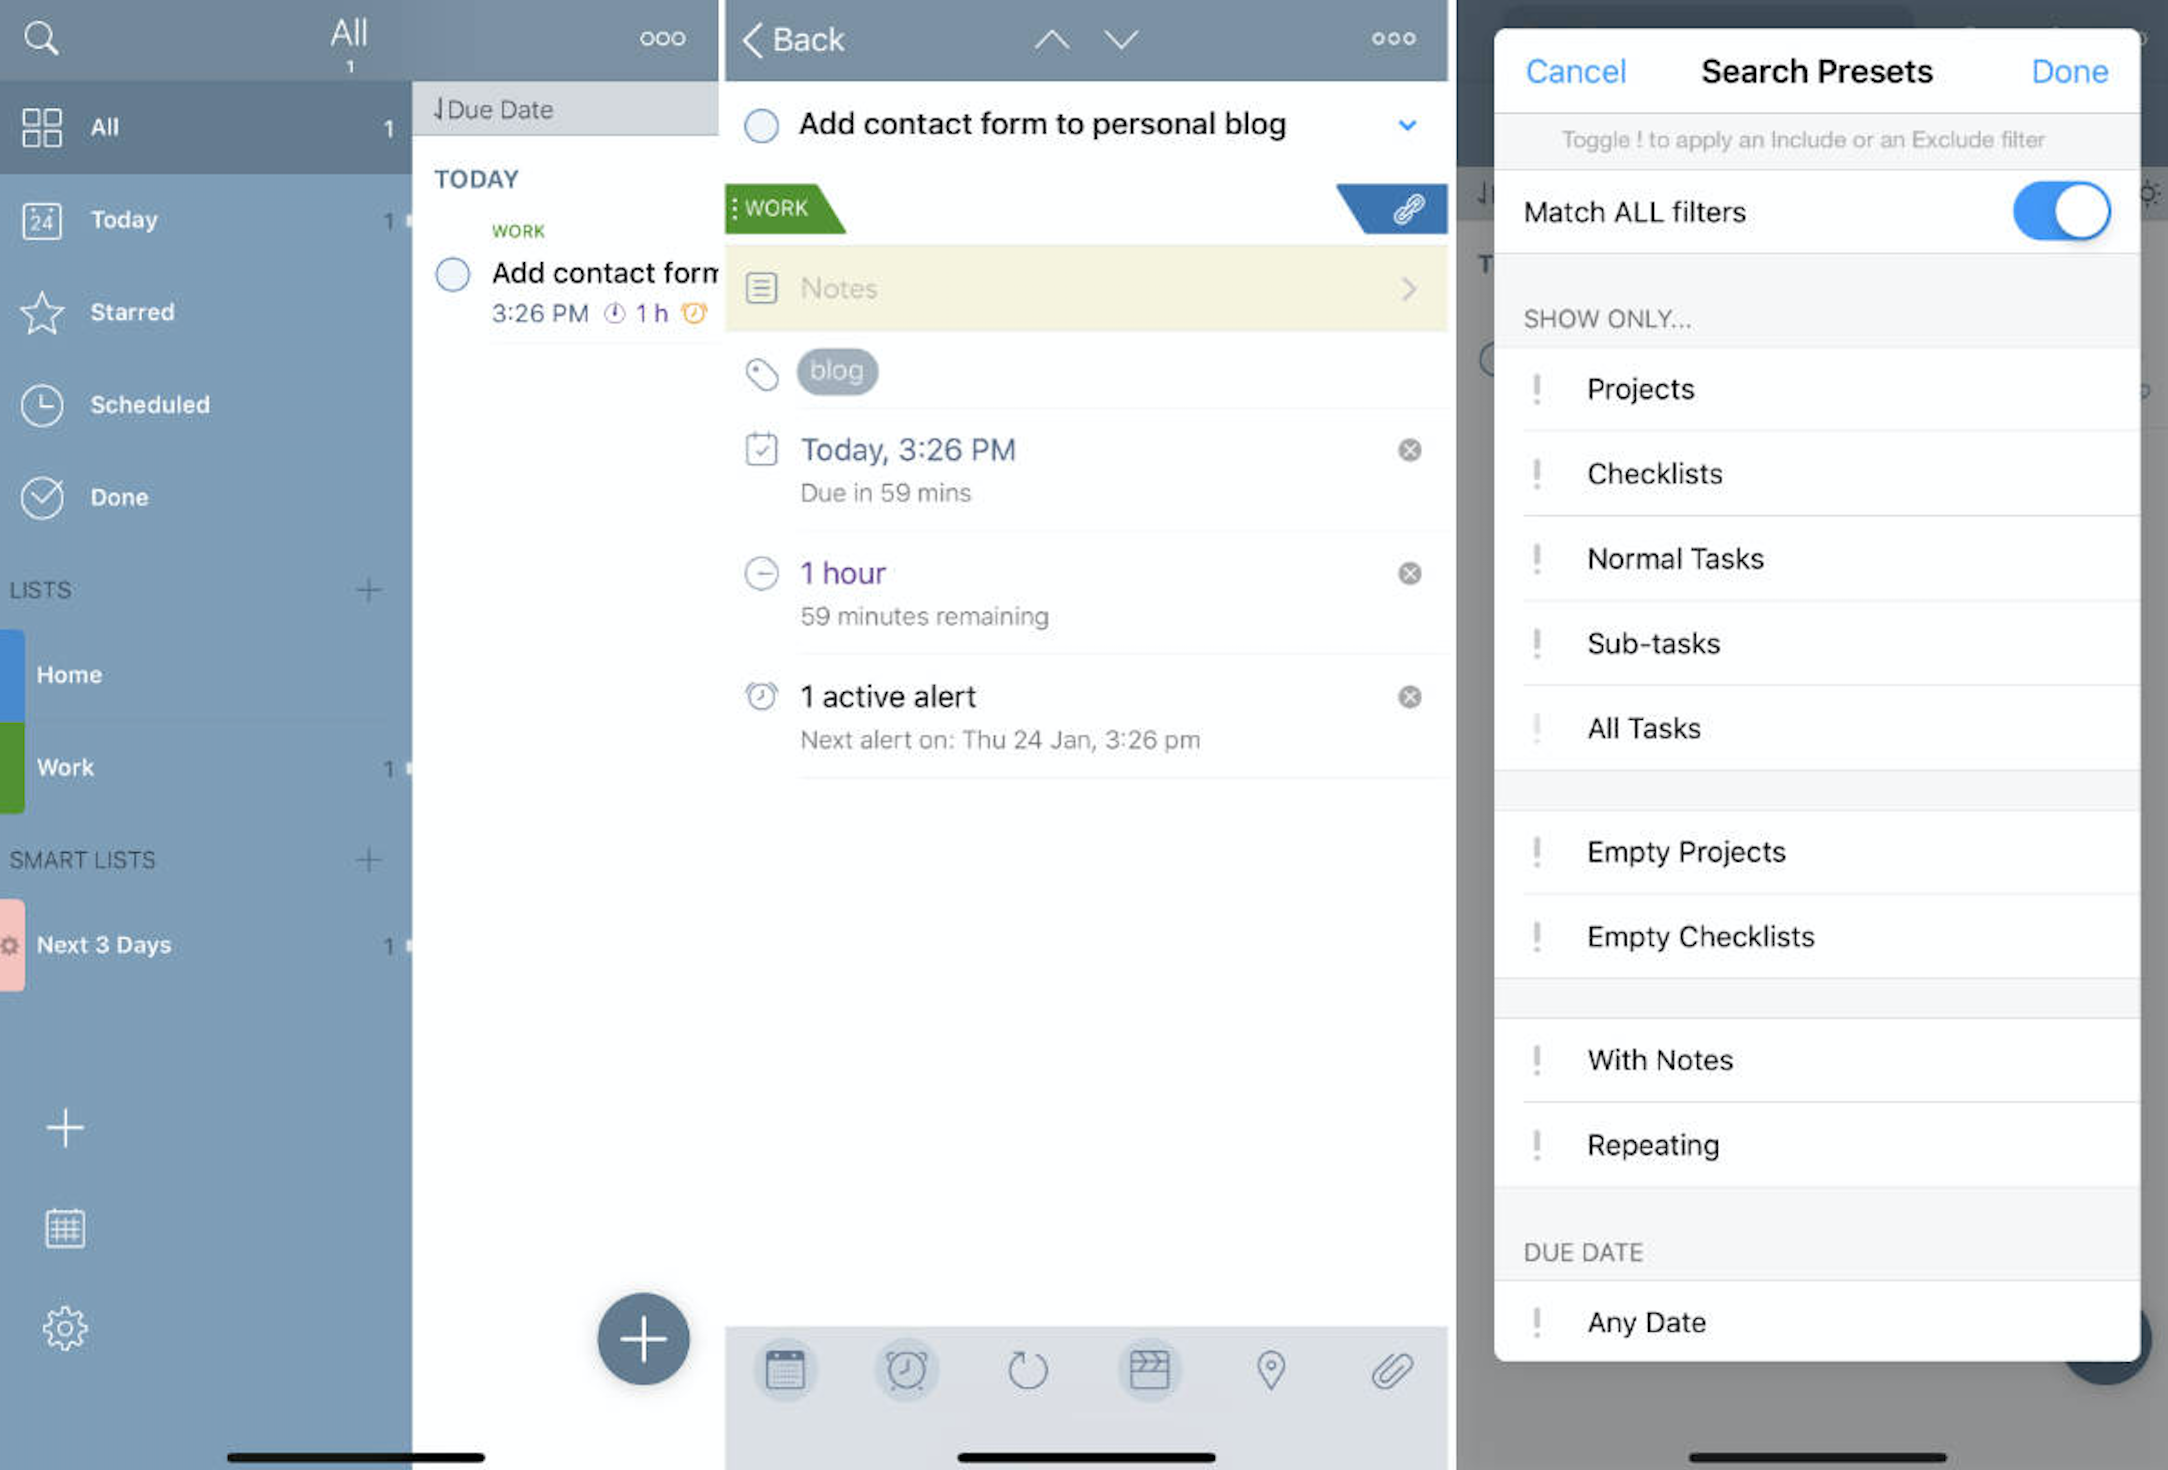 Microsoft unveils new version of its To-Do app